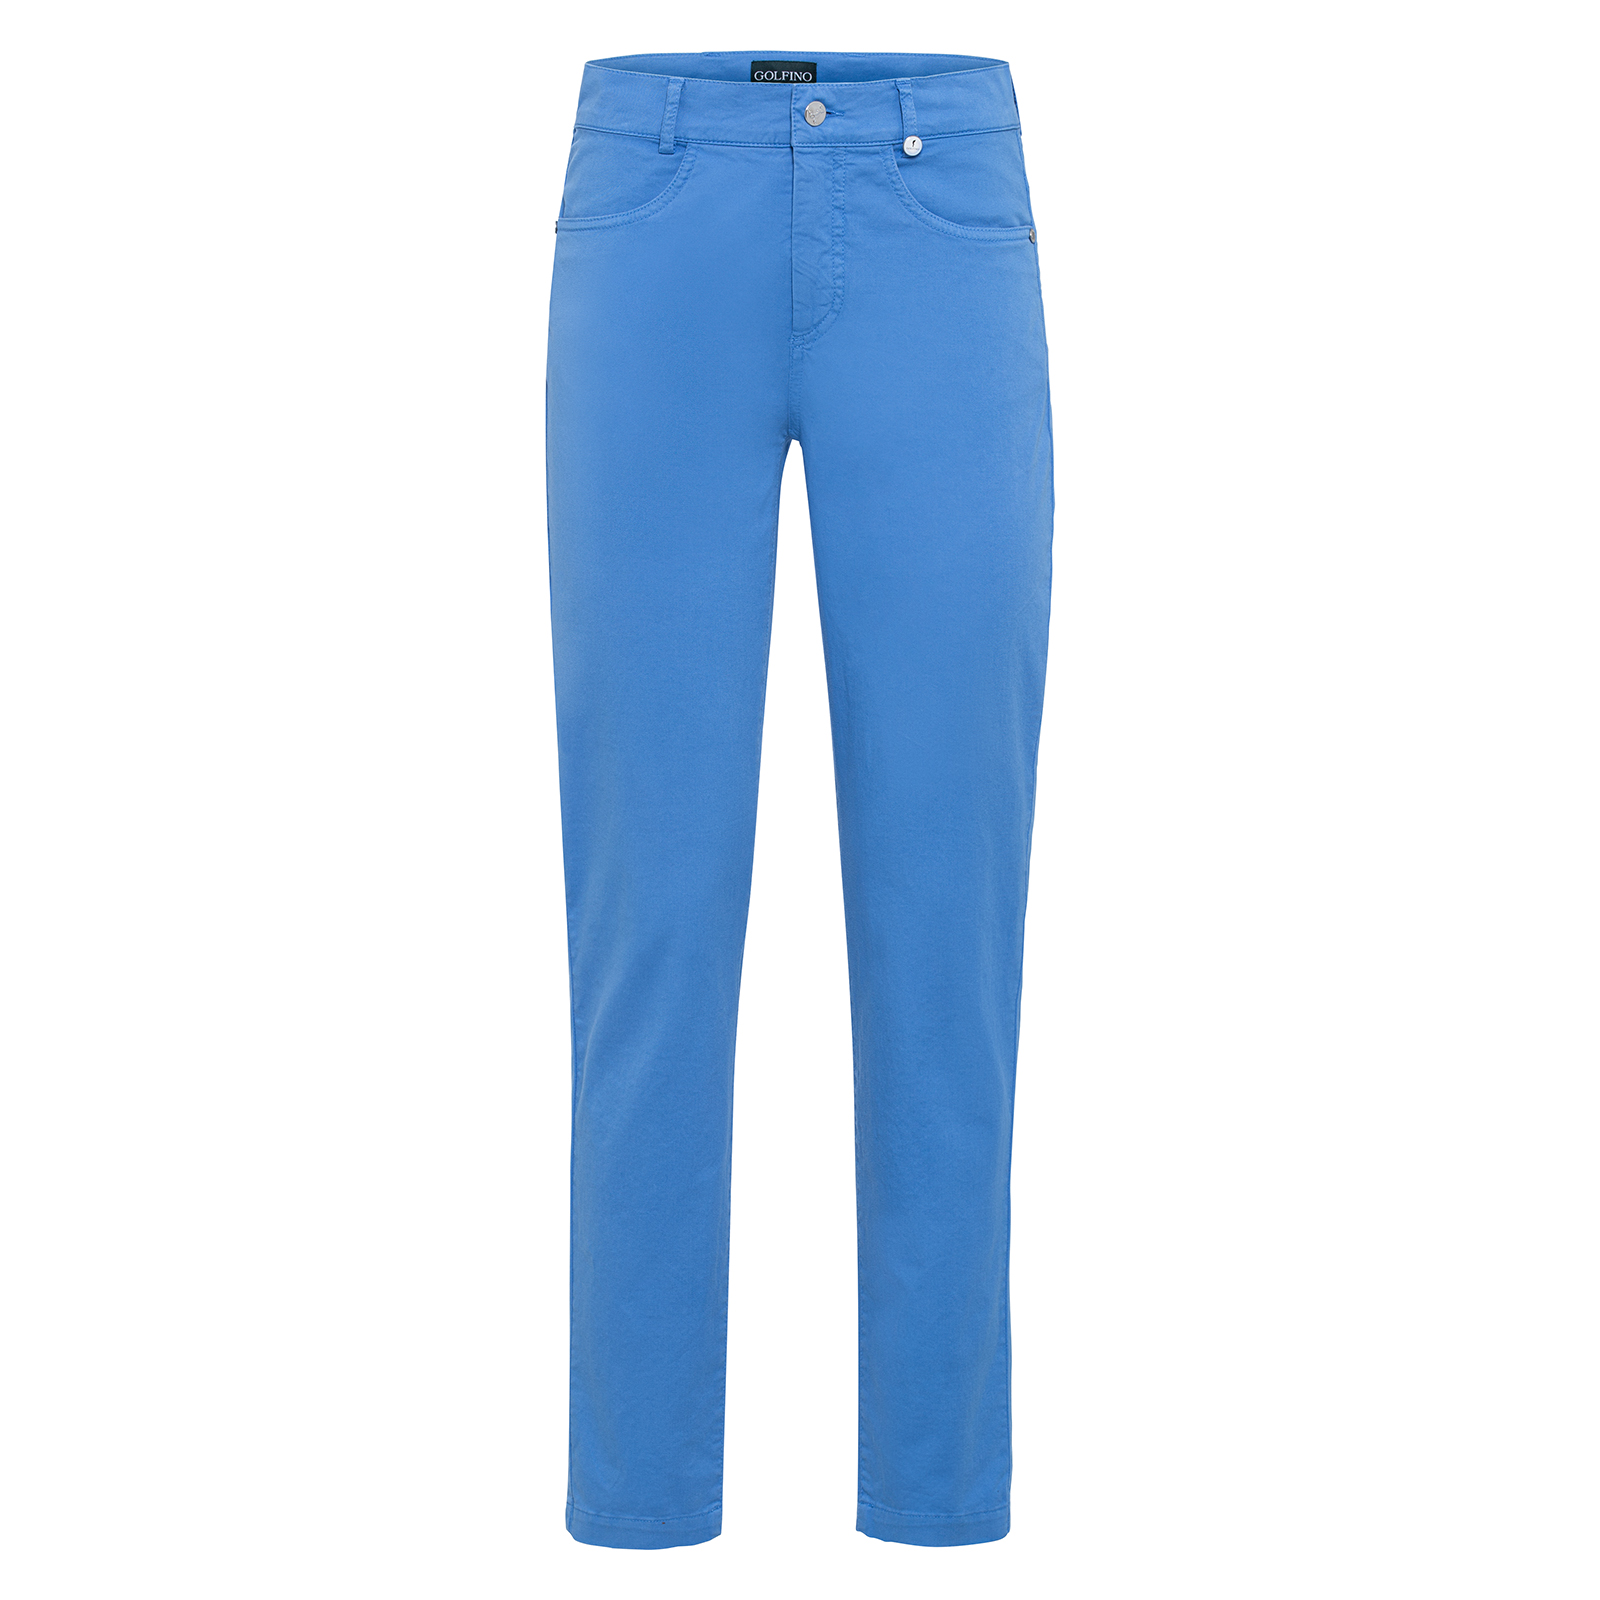 Soft cotton trousers for Ladies in 7/8 length